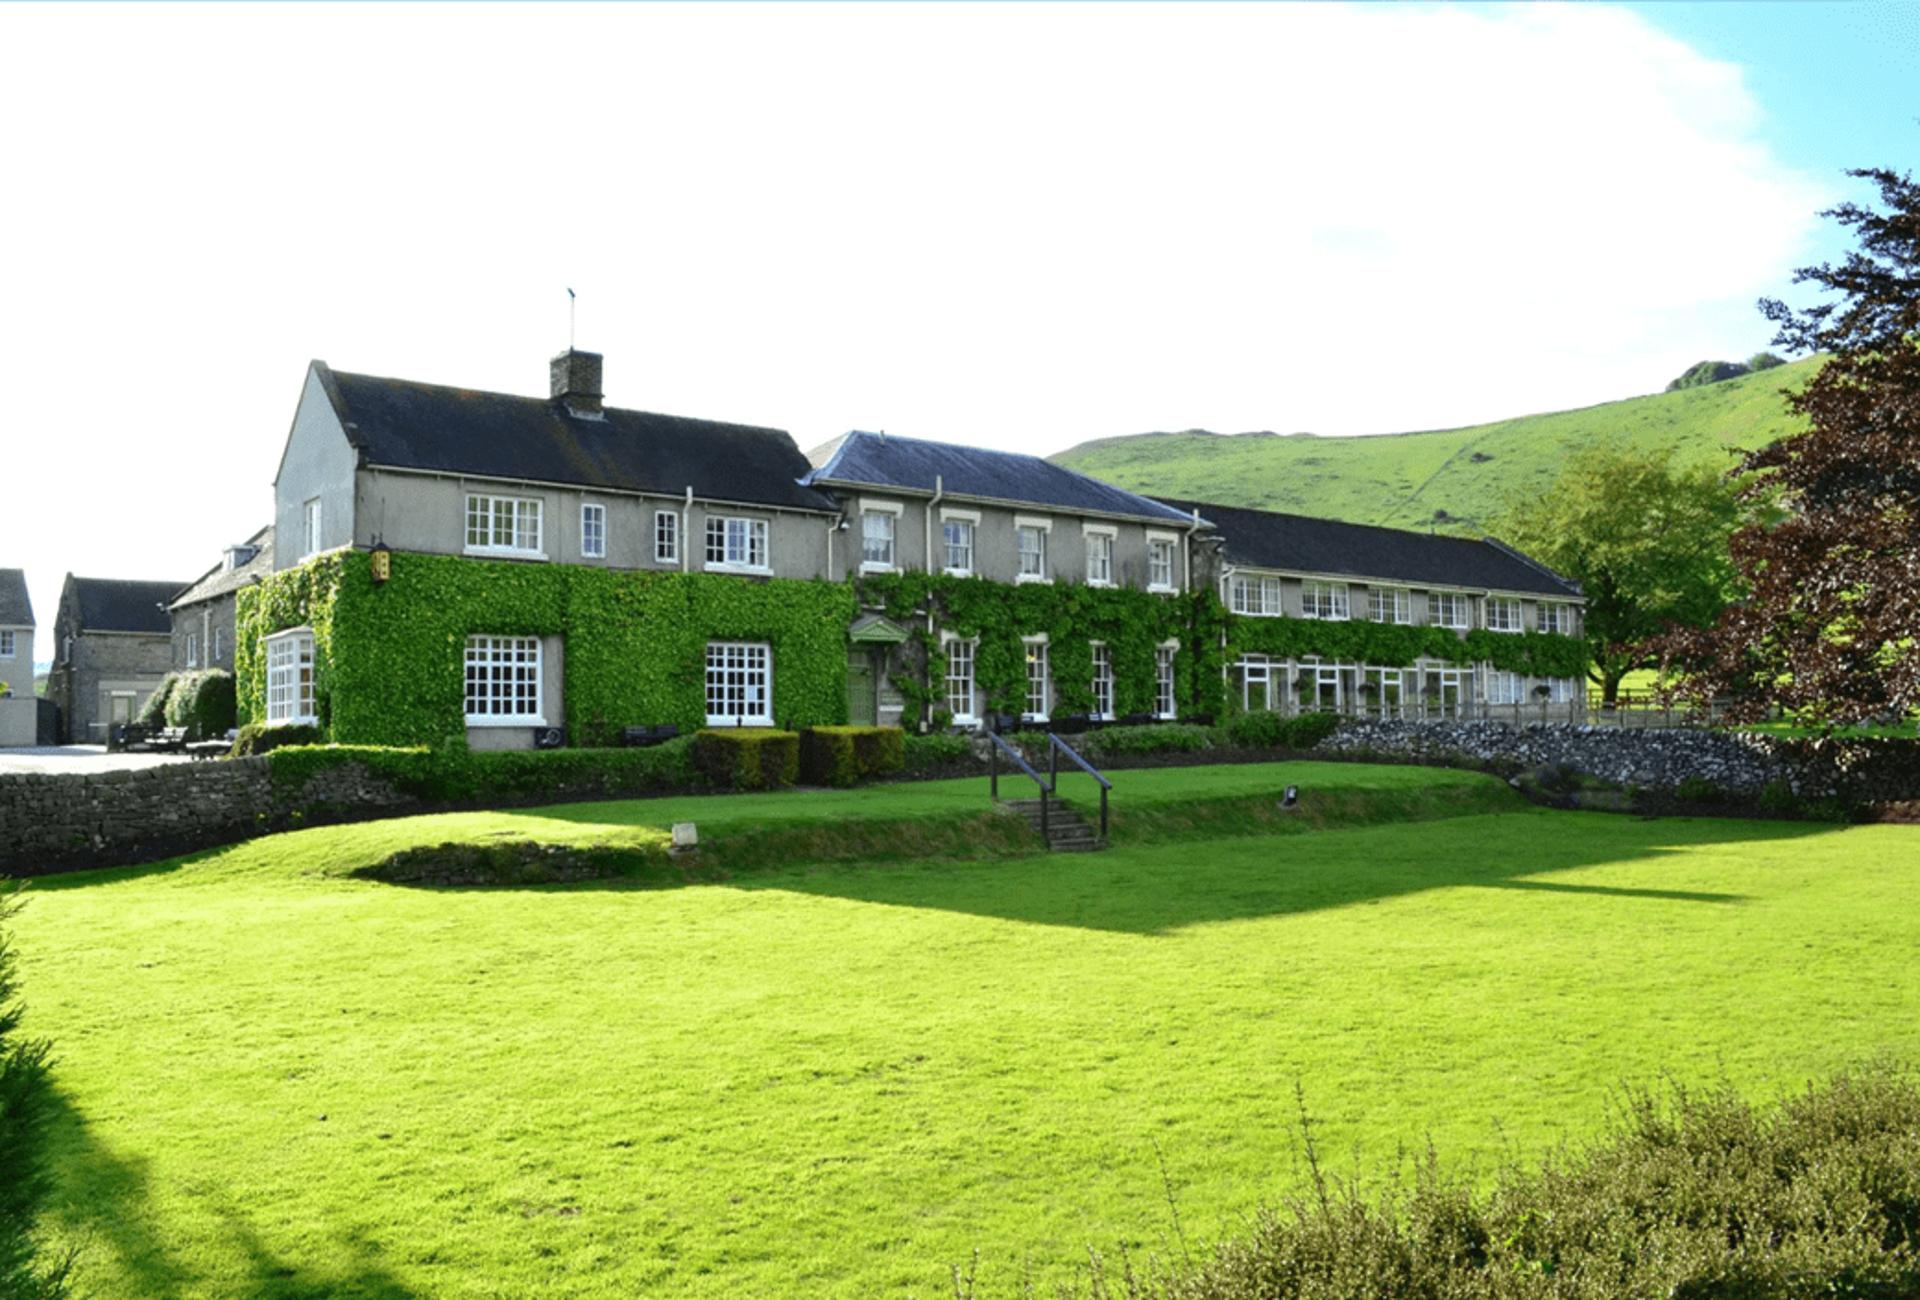 Peak District hotel up for sale for &pound;2.35m